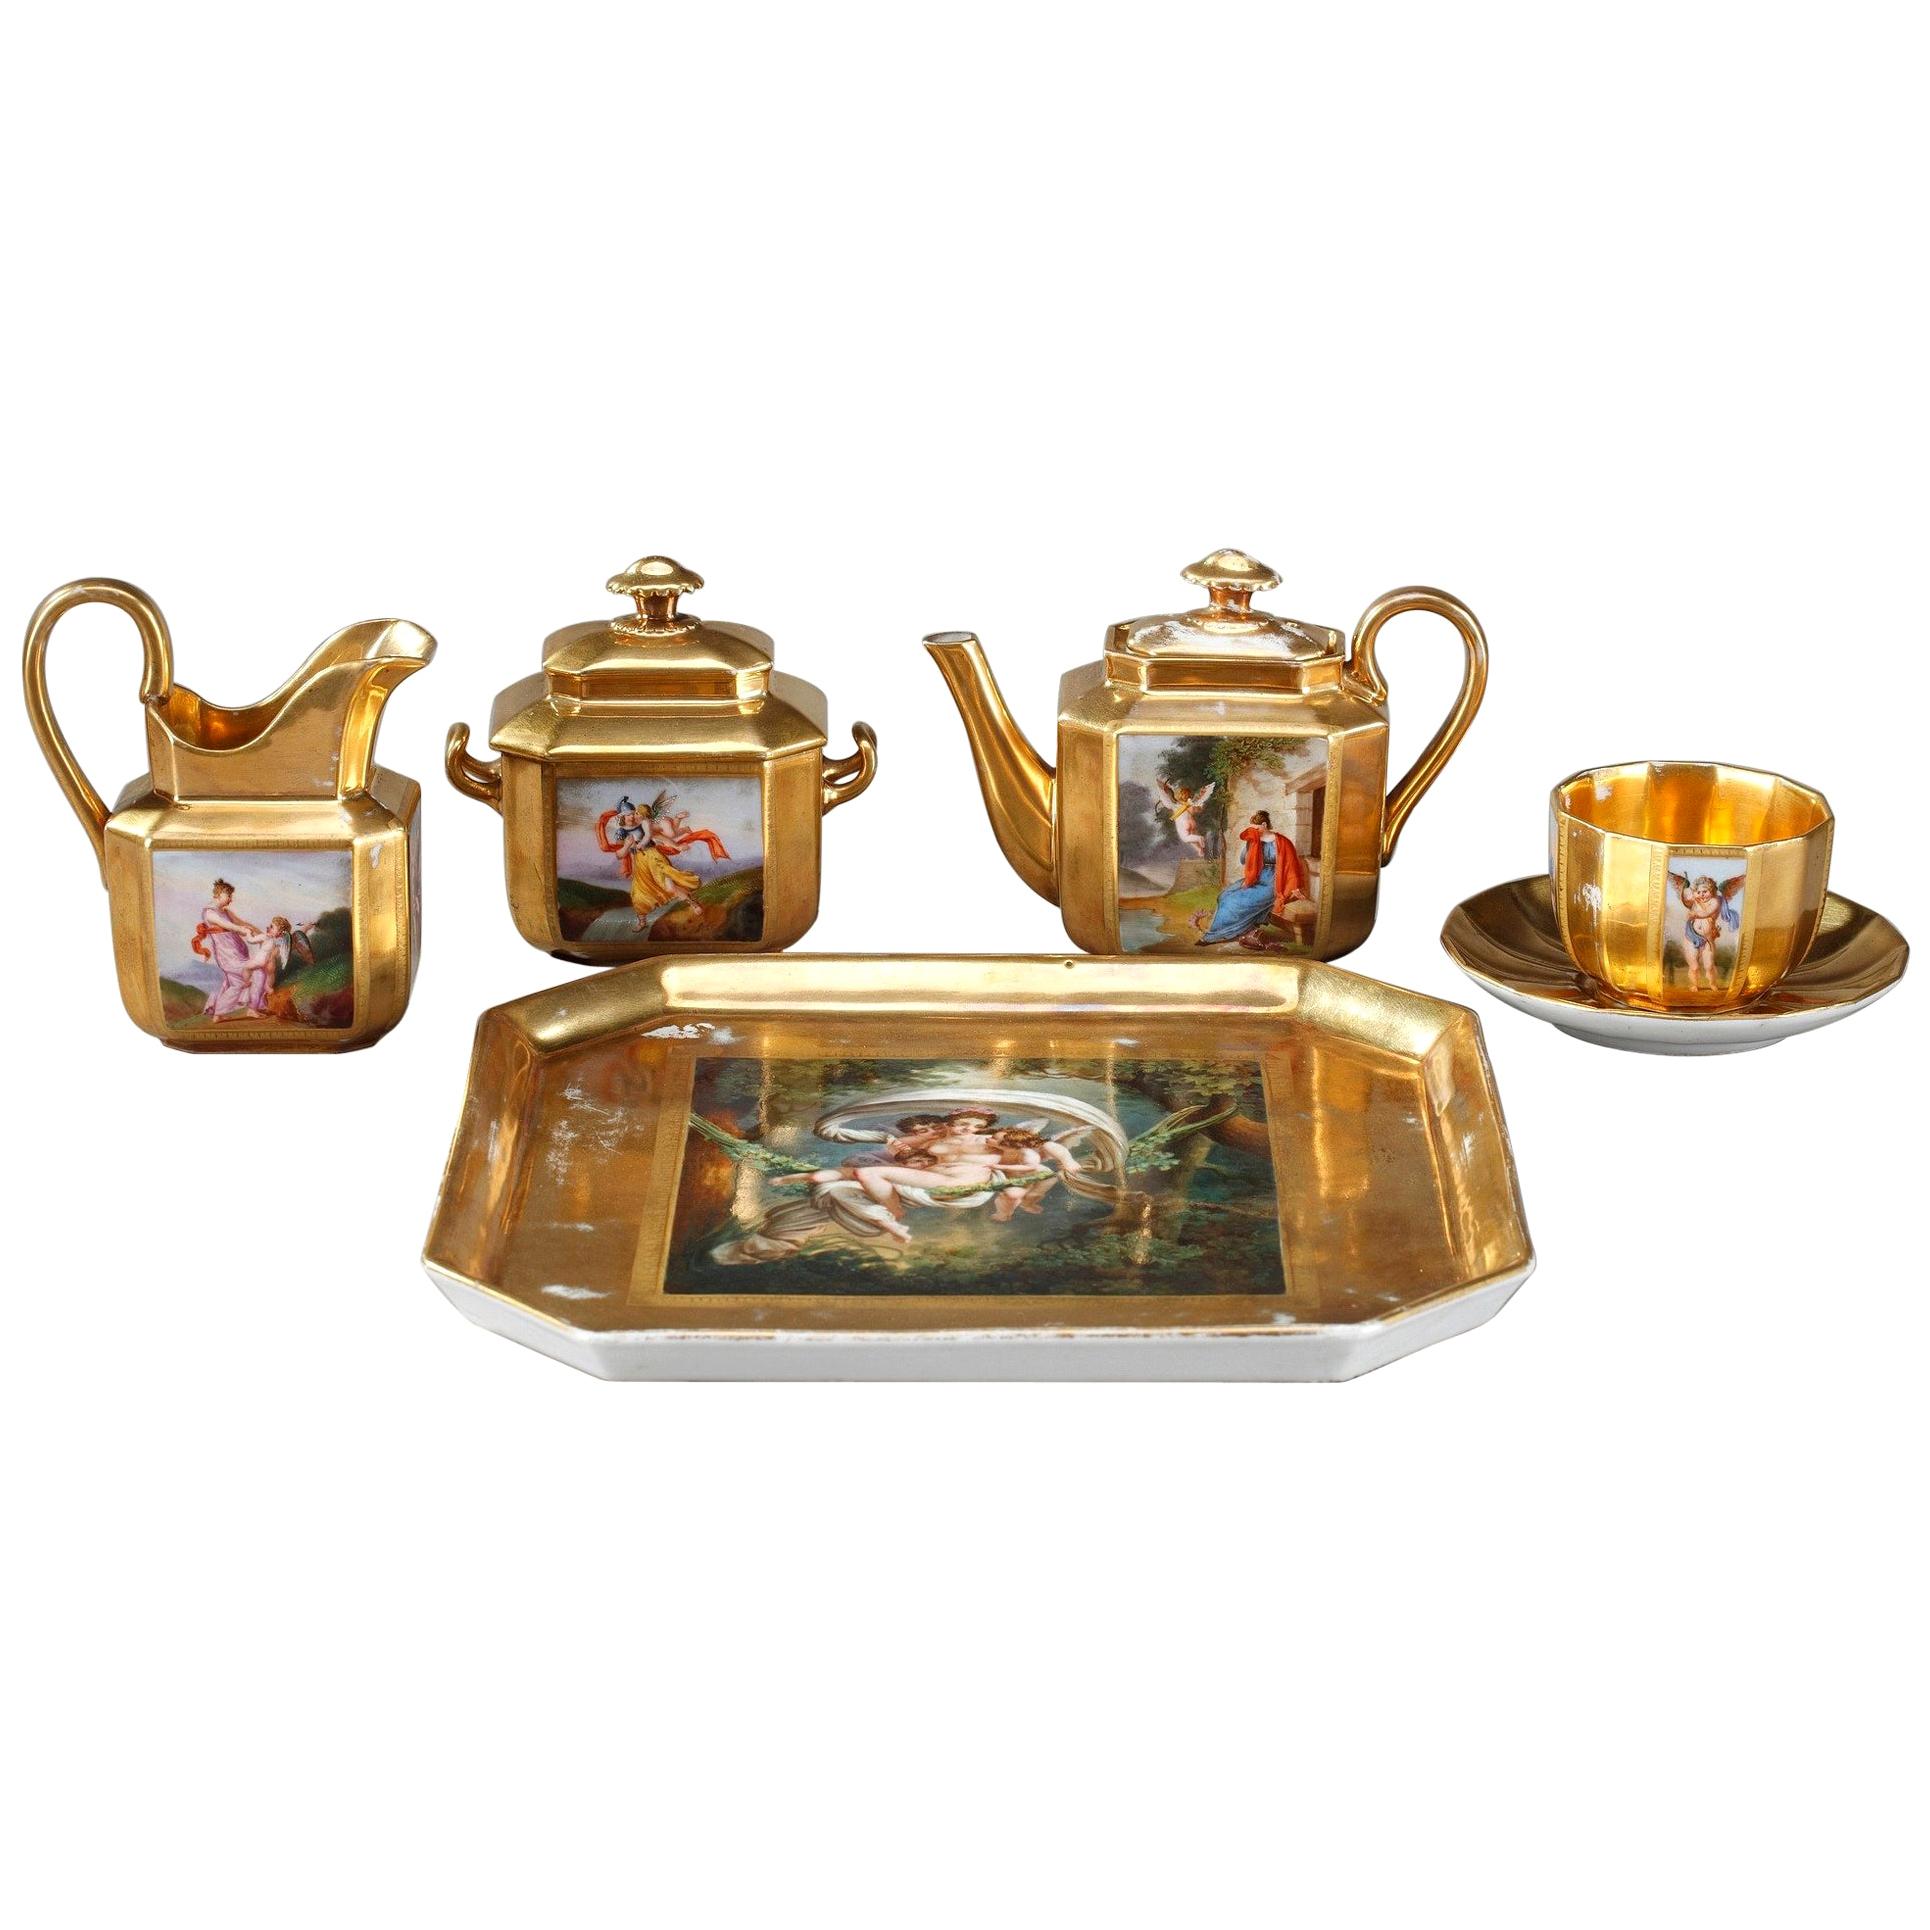 Empire Porcelain Coffee Service with Mythological Scenes